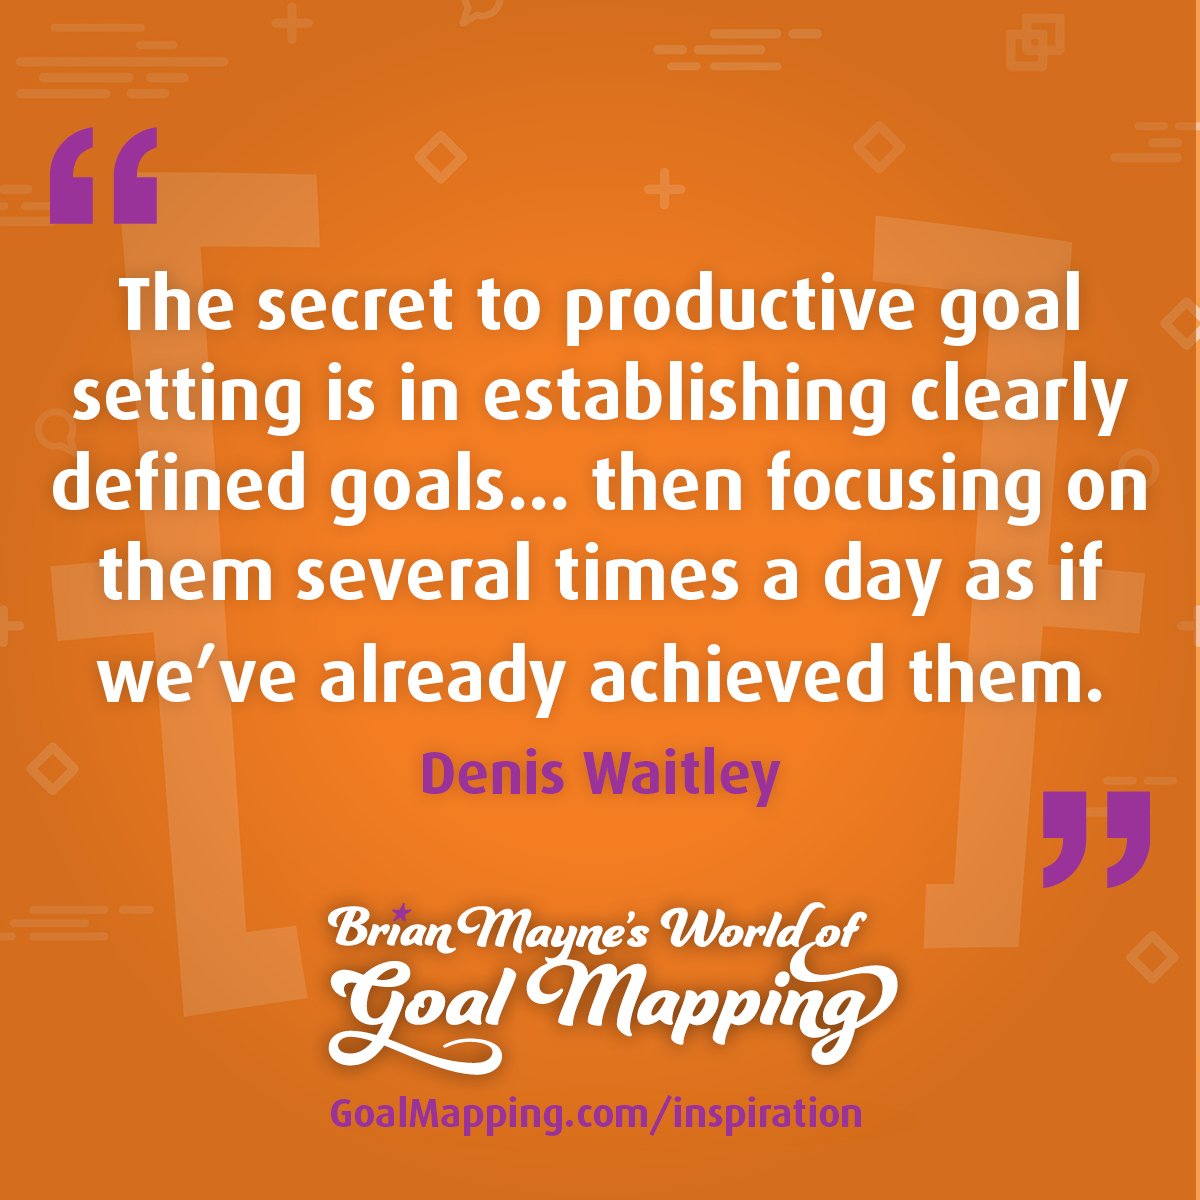 "The secret to productive goal setting is in establishing clearly defined goals... then focusing on them several times a day as if we’ve already achieved them." Denis Waitley